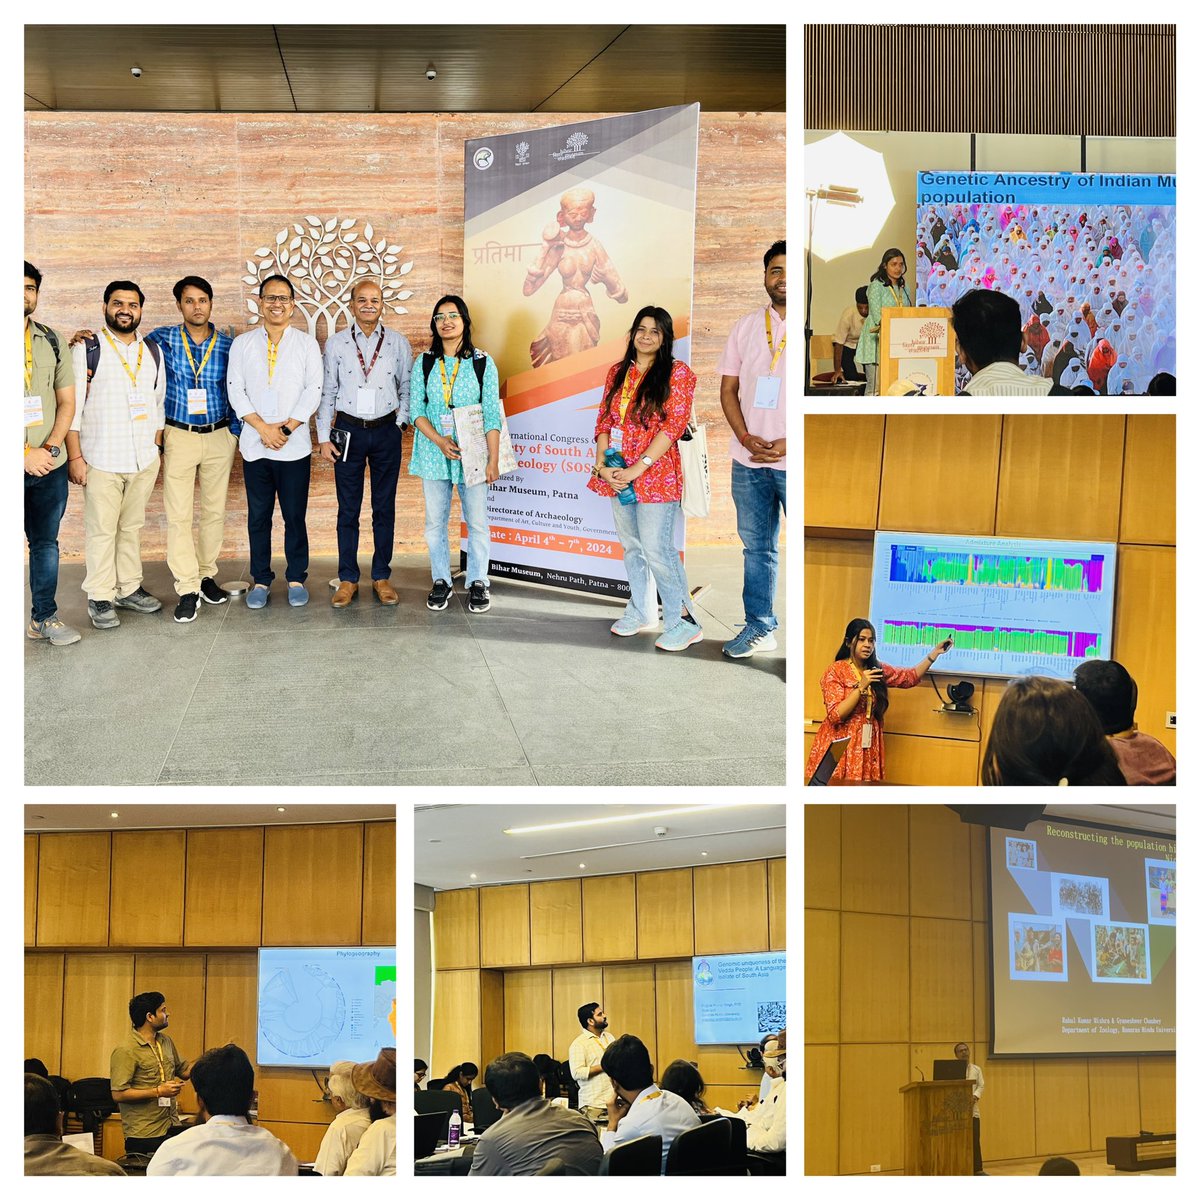 The members of #GyanLab showcased their expertise with six impactful oral presentations at the #SOSAA 2024 International Congress. Their contributions were well-received and left a lasting impression on the audience. #PatnaMuseum #Archaeogenetics